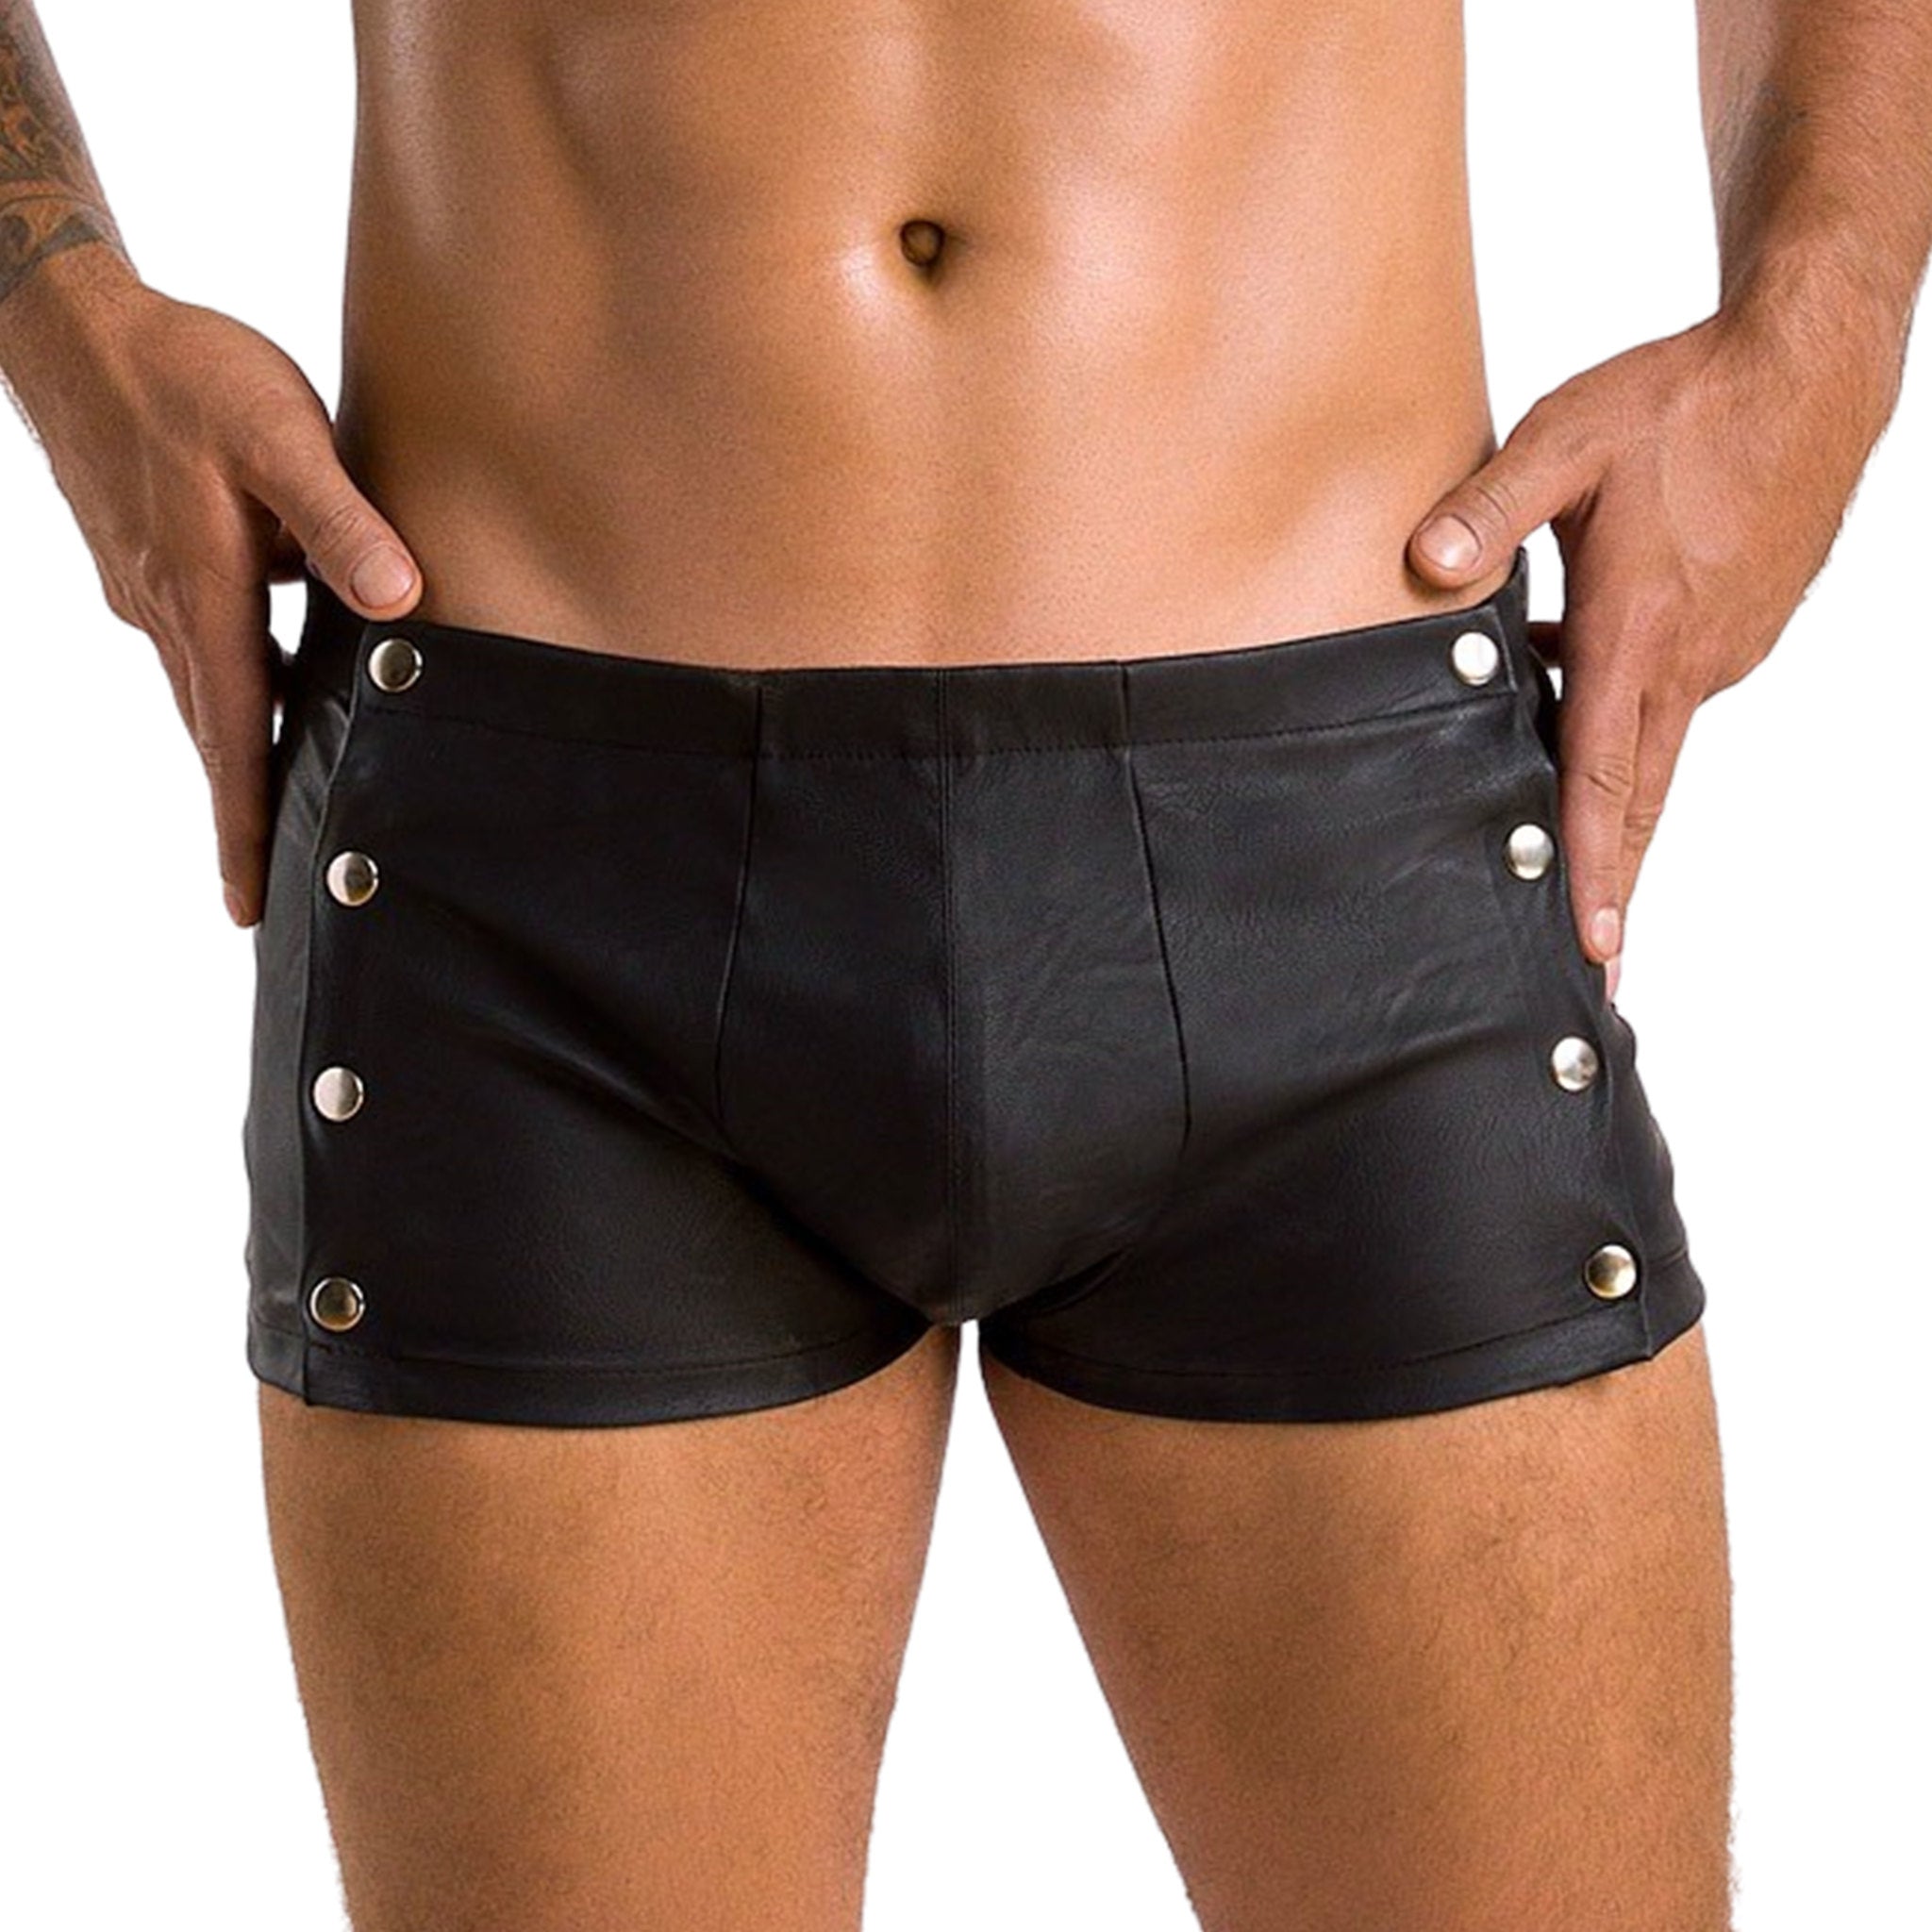 Wetlook Shorts with Sides Snaps Size 2XL/3XL